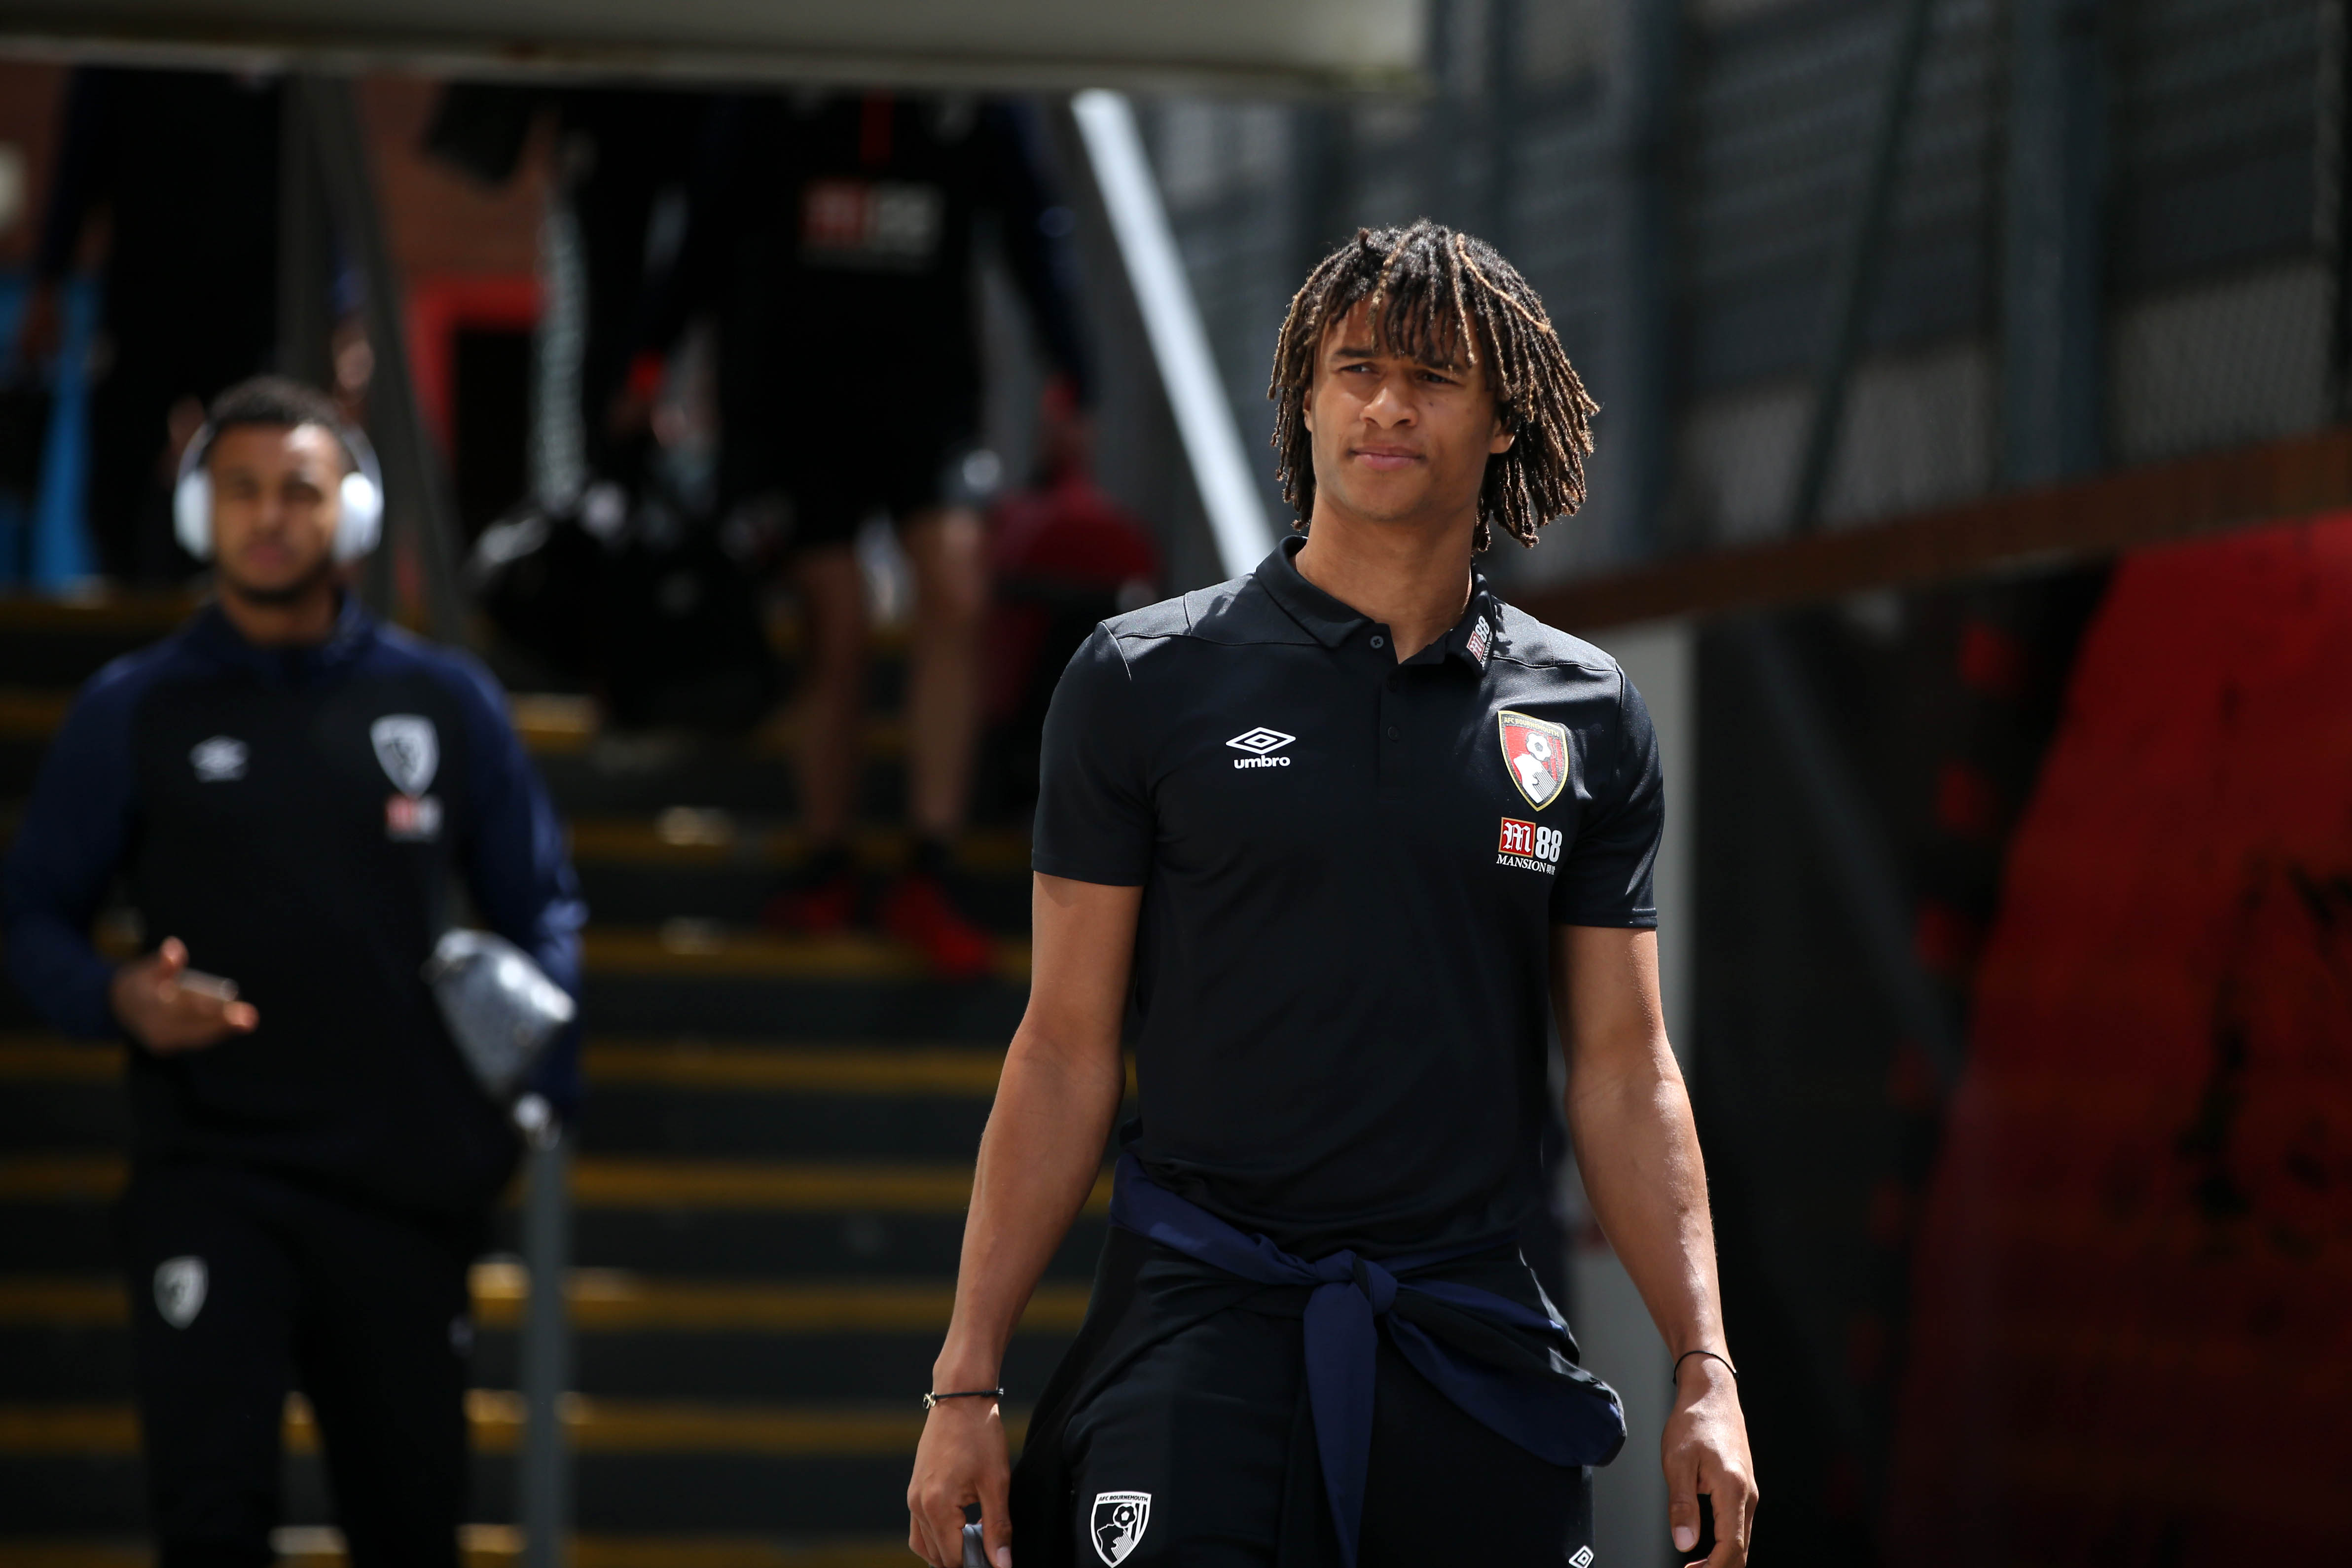 LONDON, ENGLAND - MAY 12: Nathan Ake of AFC Bournemouth arrives at the stadium prior to the Premier League match between Crystal Palace and AFC Bournemouth at Selhurst Park on May 12, 2019 in London, United Kingdom. (Photo by Steve Bardens/Getty Images)